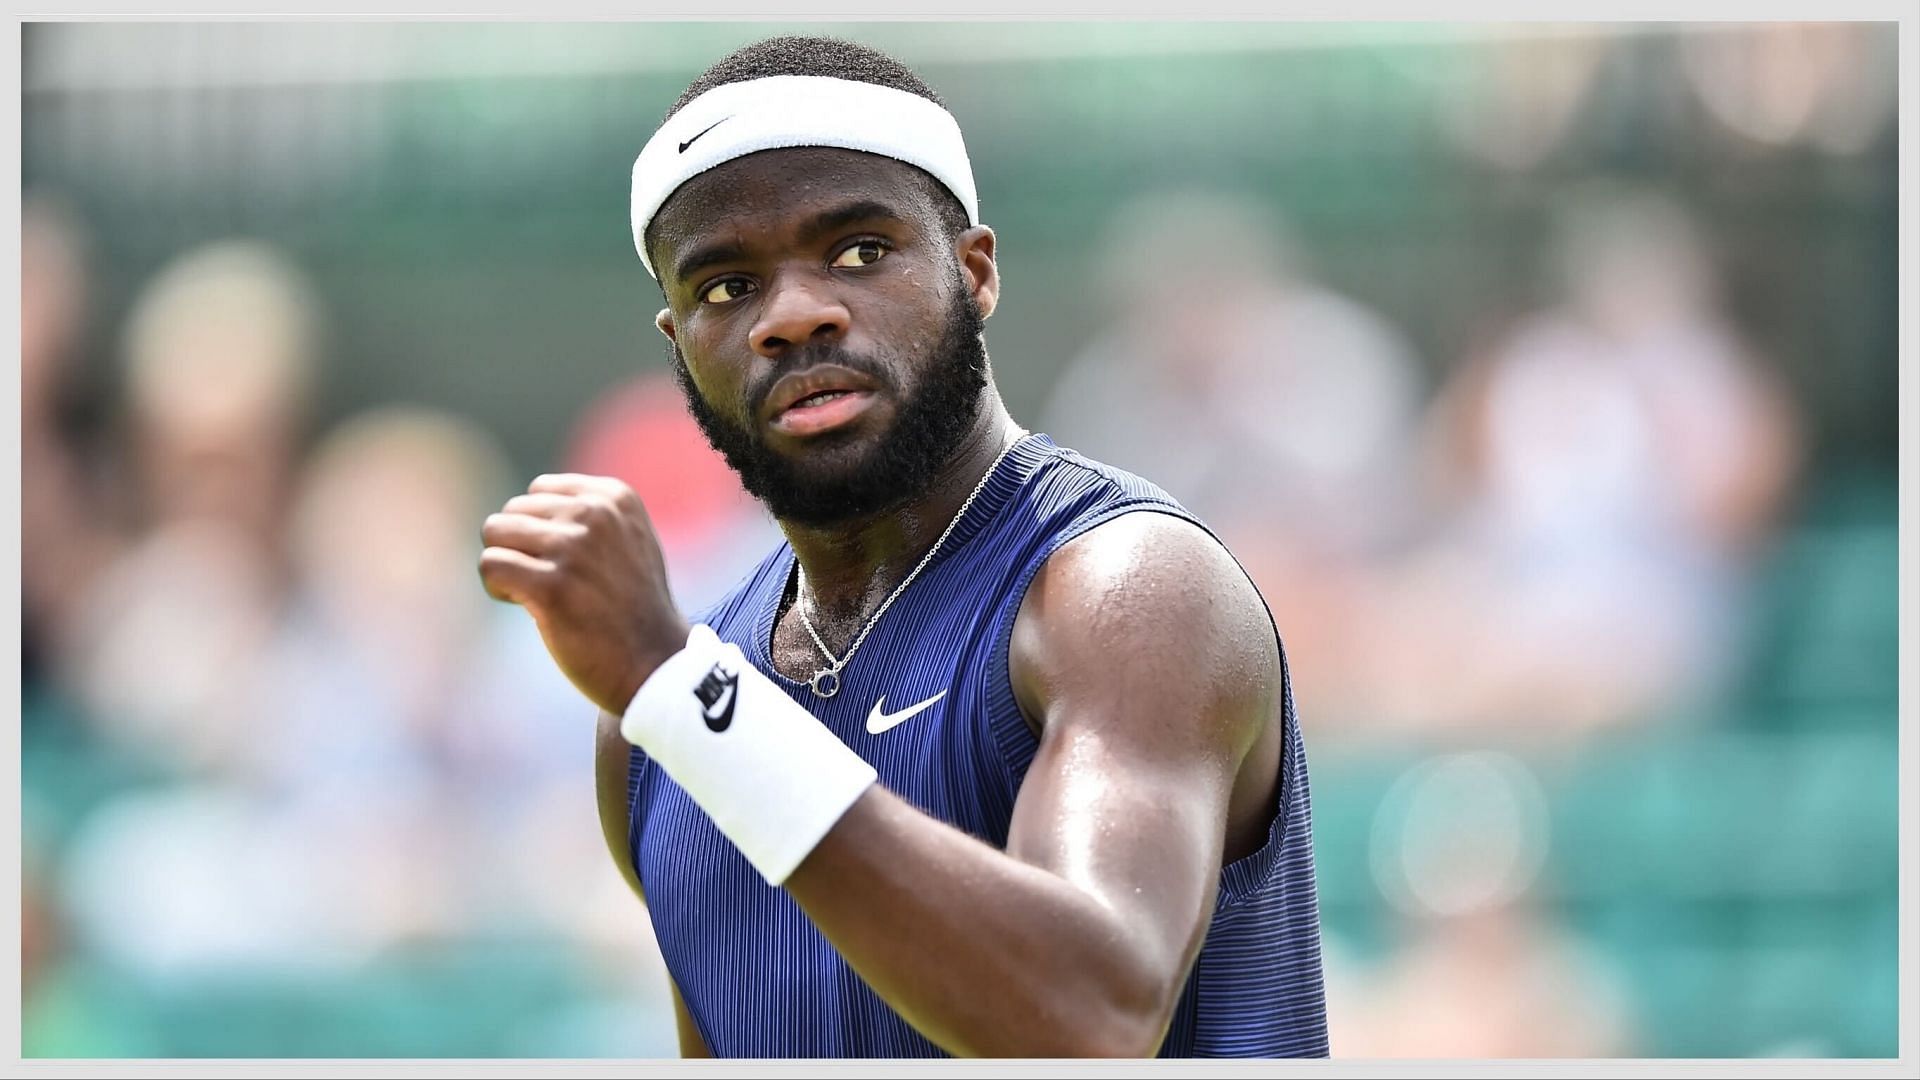 Frances Tiafoe's controversial claim about losing to 'clowns': A look into the American's recent defeats and why he was wrong to say so